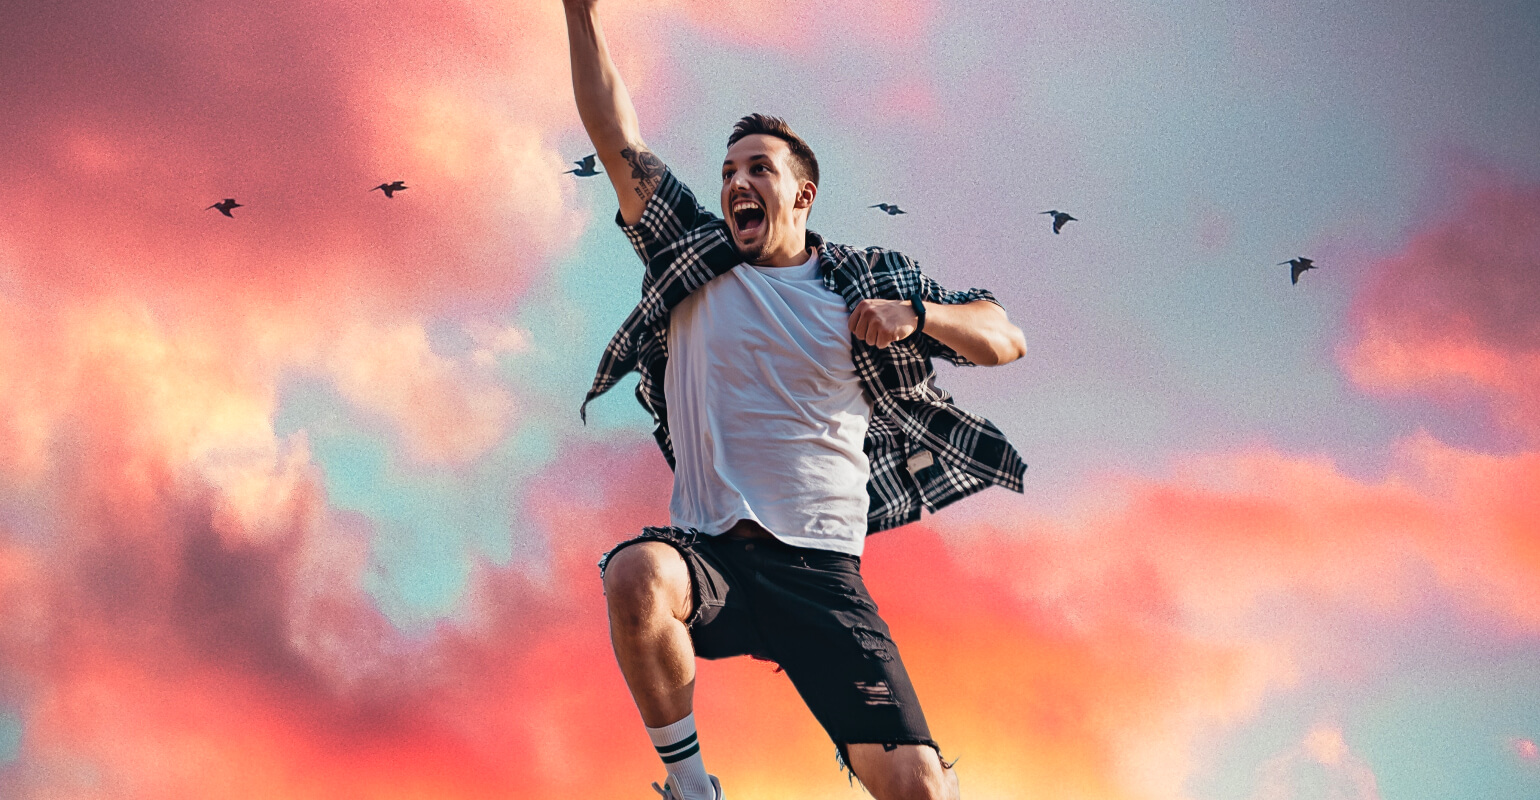 Jumping man image with pink sunset background